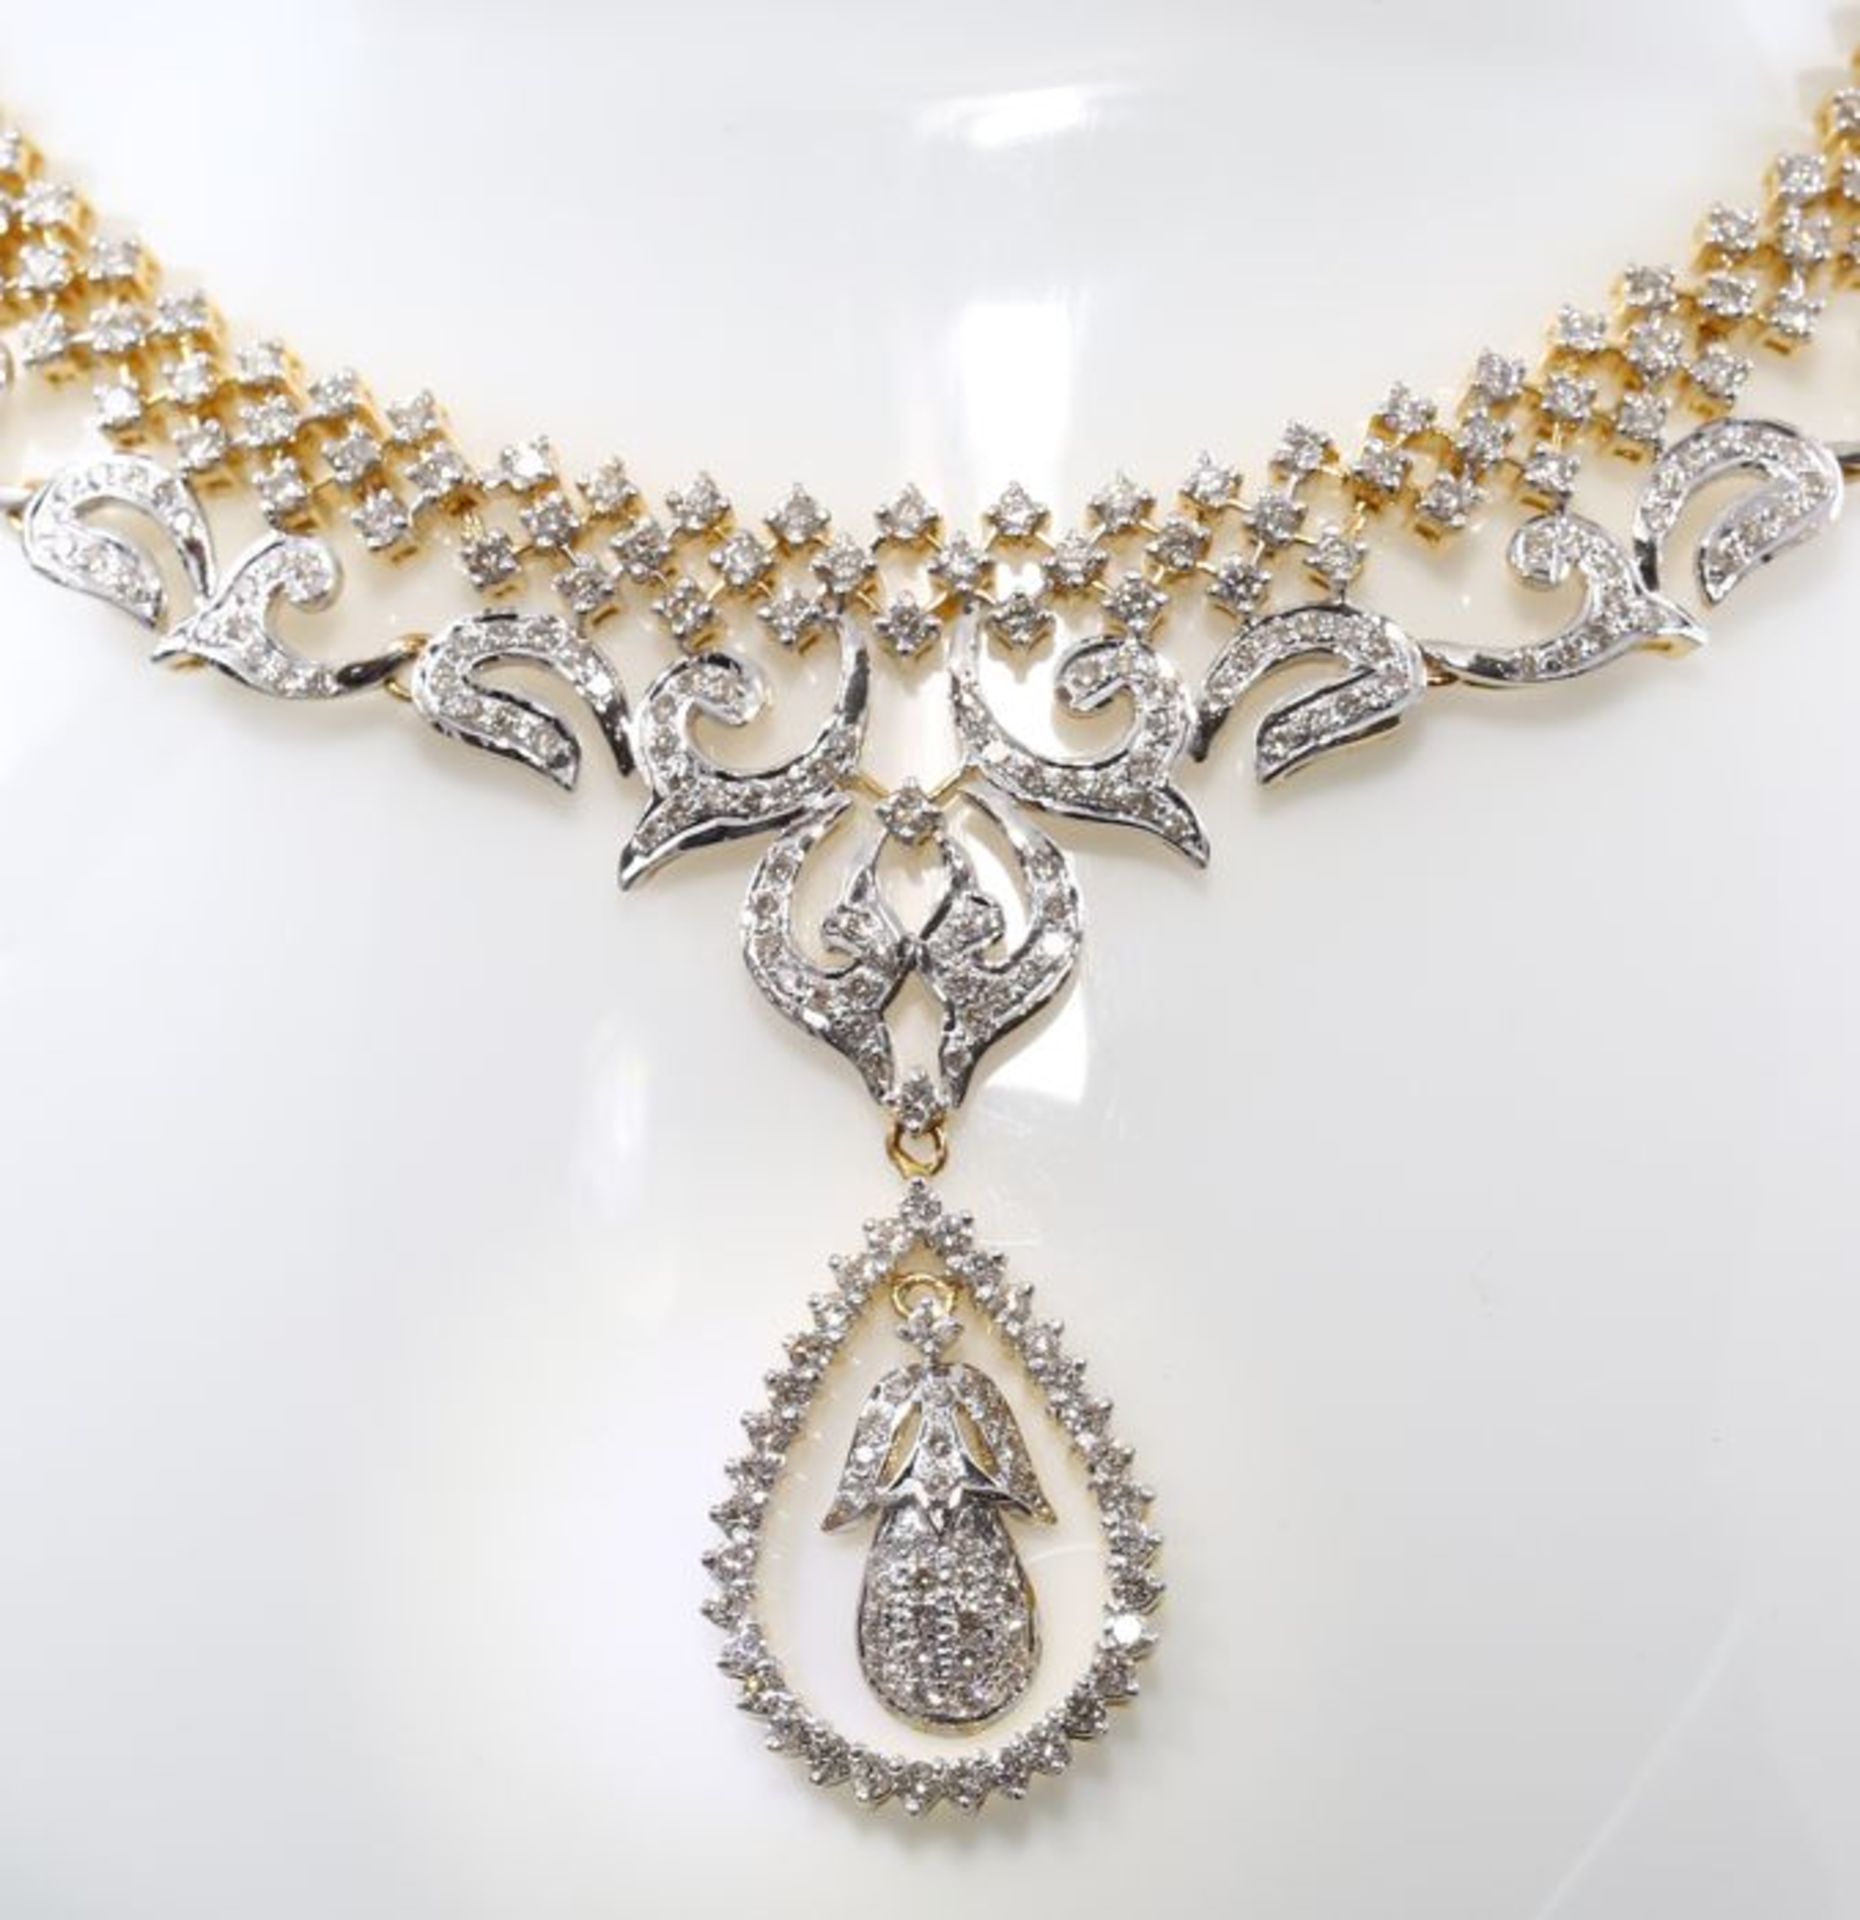 IGI Certified Large Yellow Gold Diamond Necklace with Chandelier Earrings - Image 5 of 9